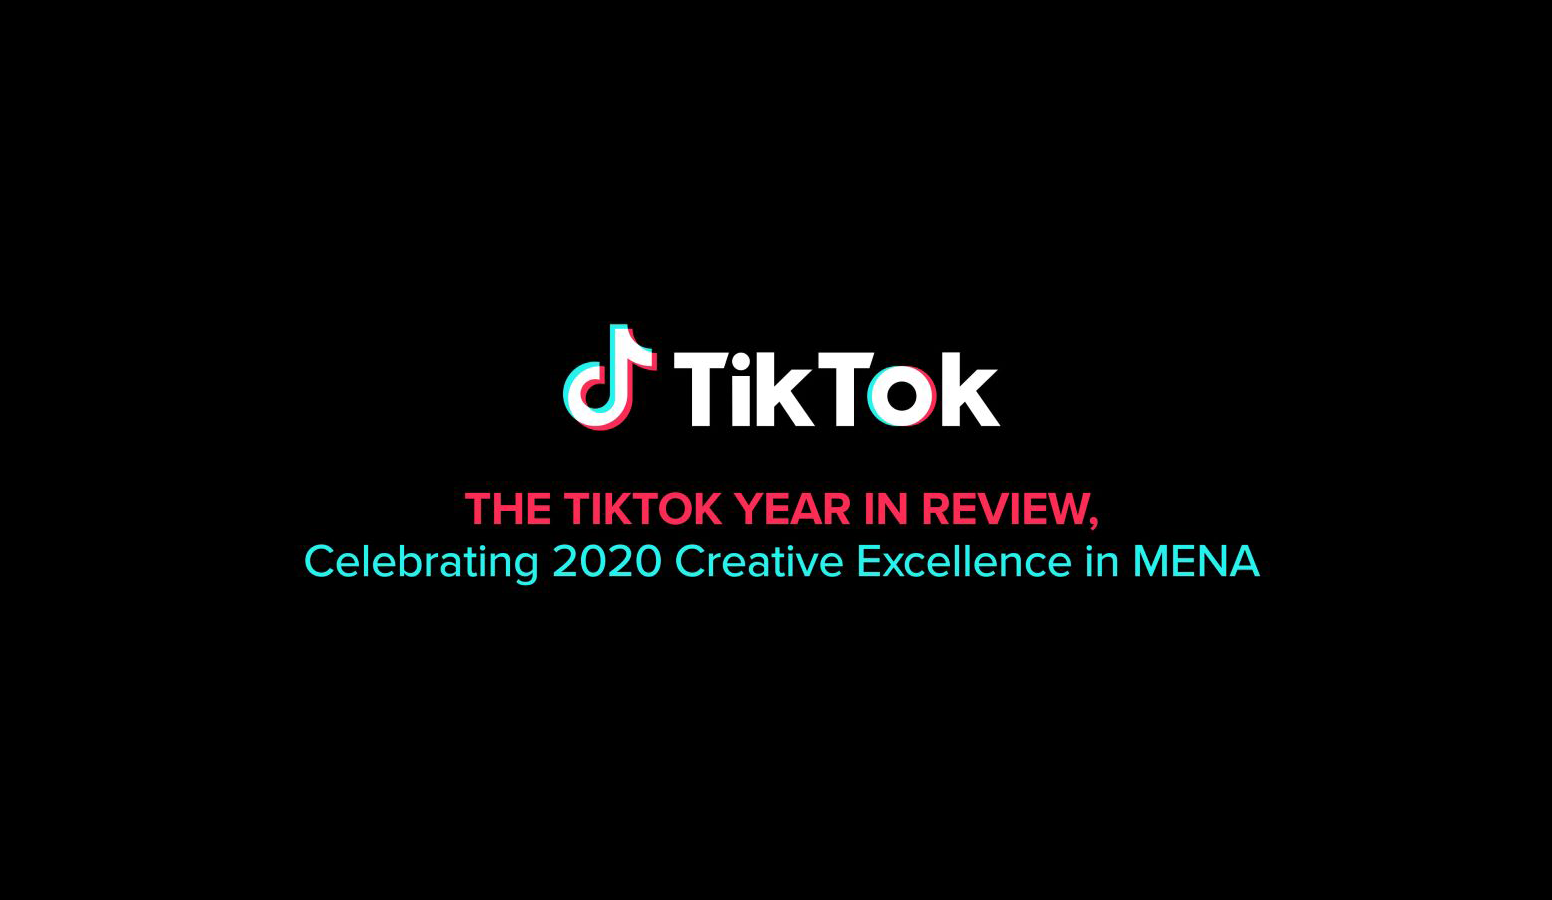 The TikTok Year in Review, Celebrating 2020 Creative Excellence in MENA